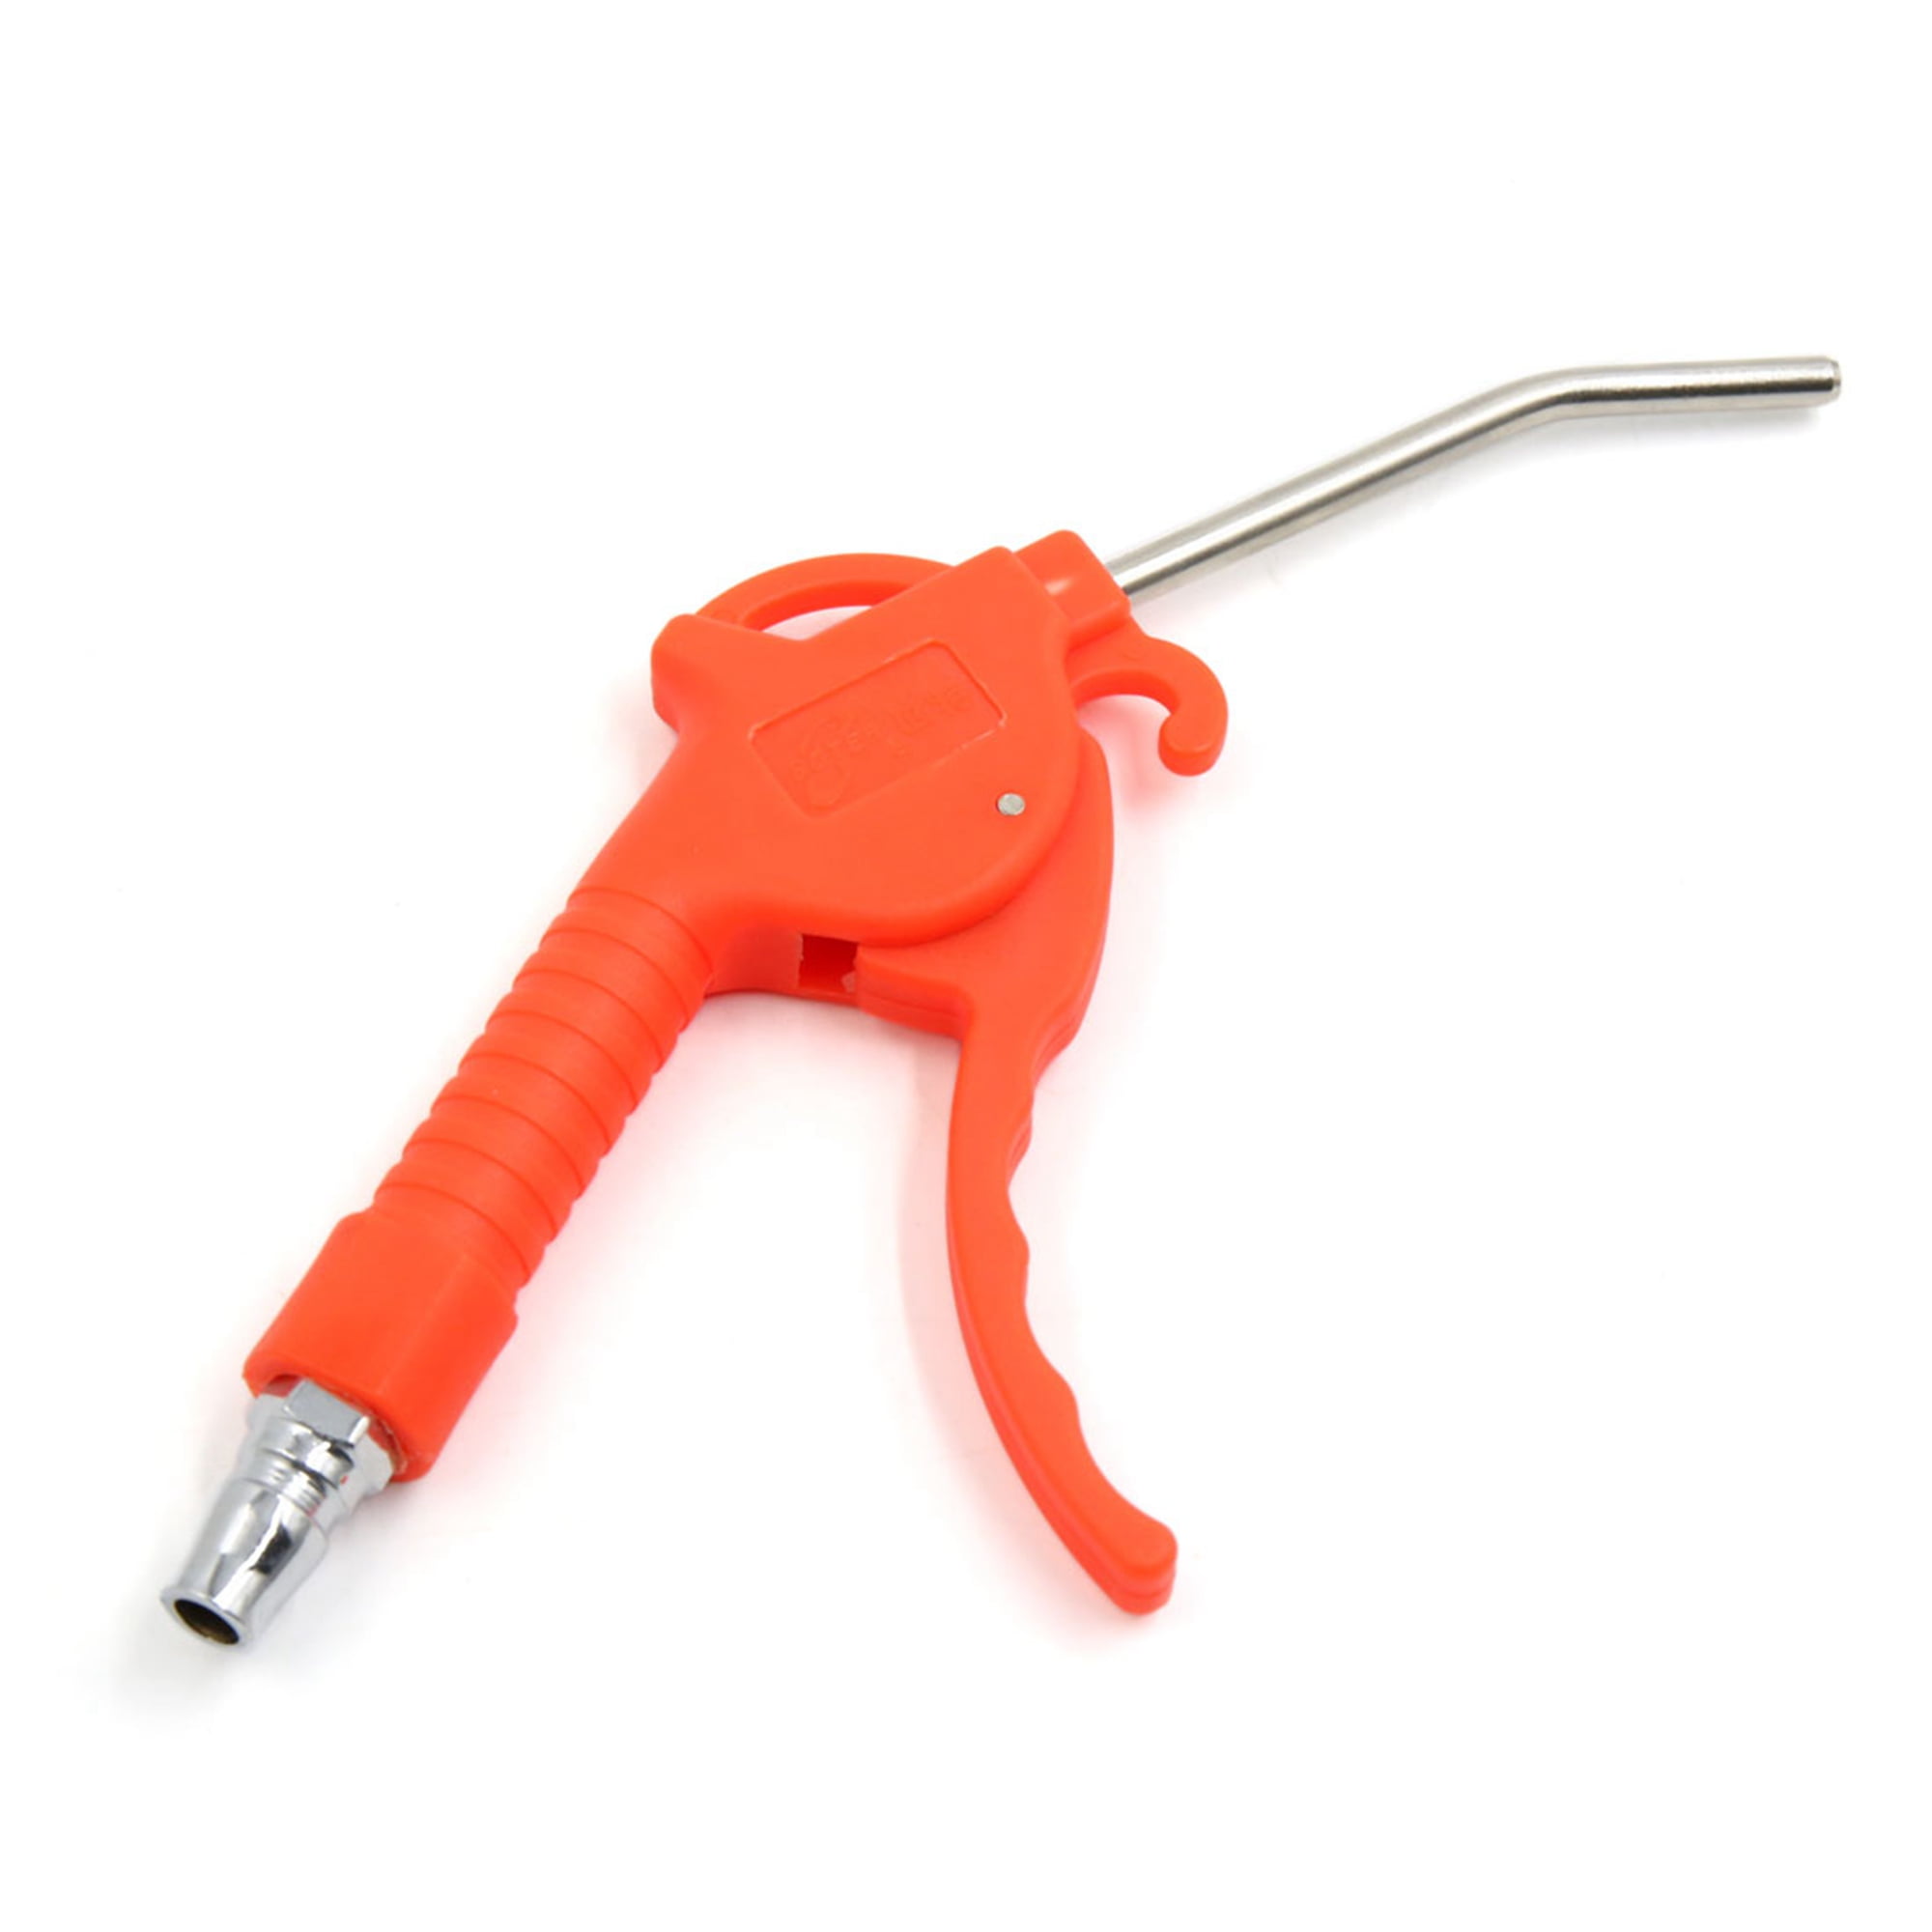 Details about   Air Blow  420mm Long Reach Spray Nozzle Compressed Air  Cleaning Tool 